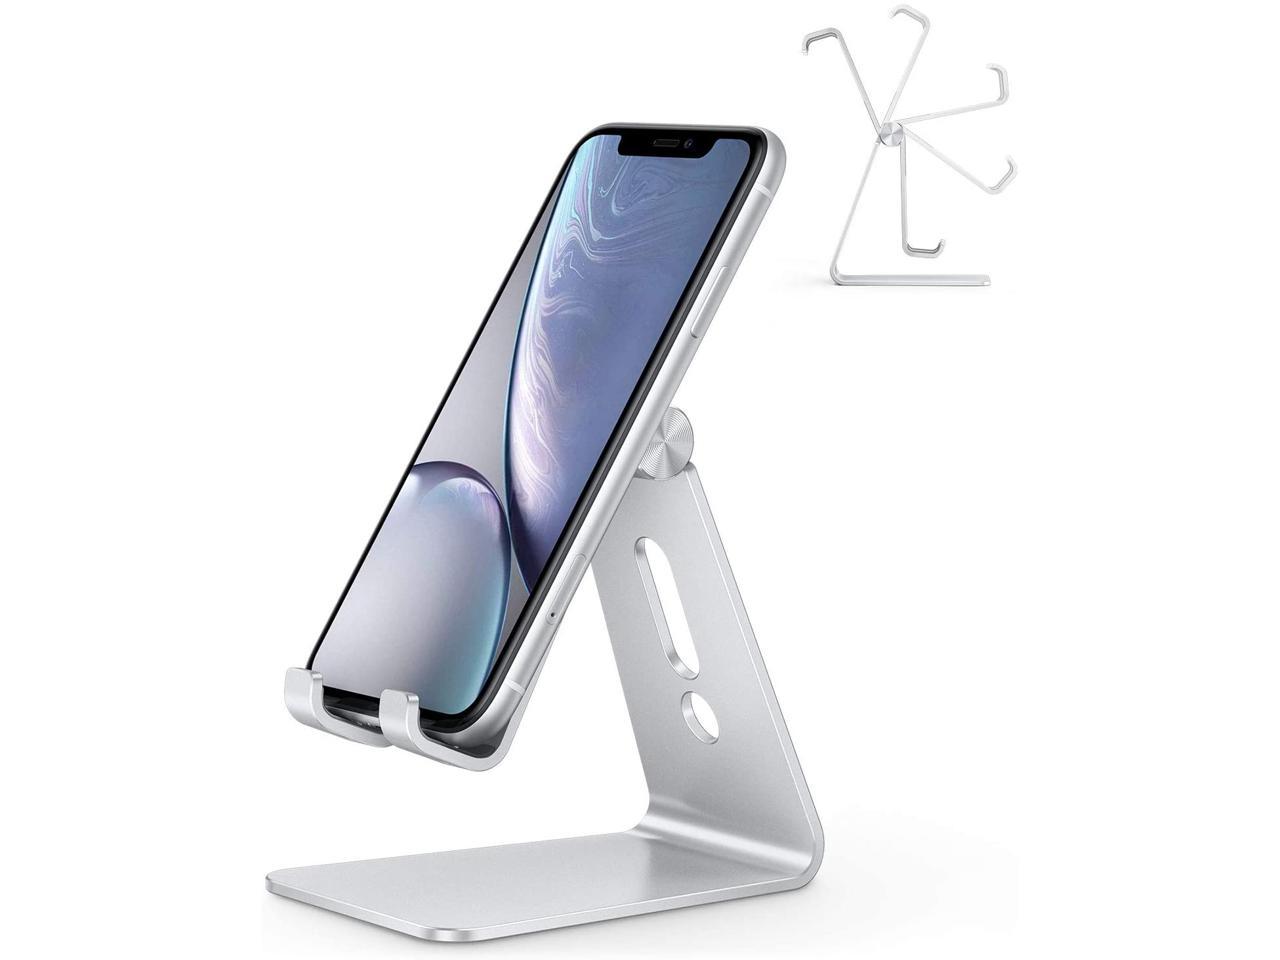 Durable Adjustable Cell Phone Stand, Aluminum Desktop Phone Holder Dock Compatible with iPhone 12 Mini, iPhone 12 Pro Max, 11 Pro, XR, 8 Plus 7 6, Samsung Galaxy, Google Pixel and More, Silver